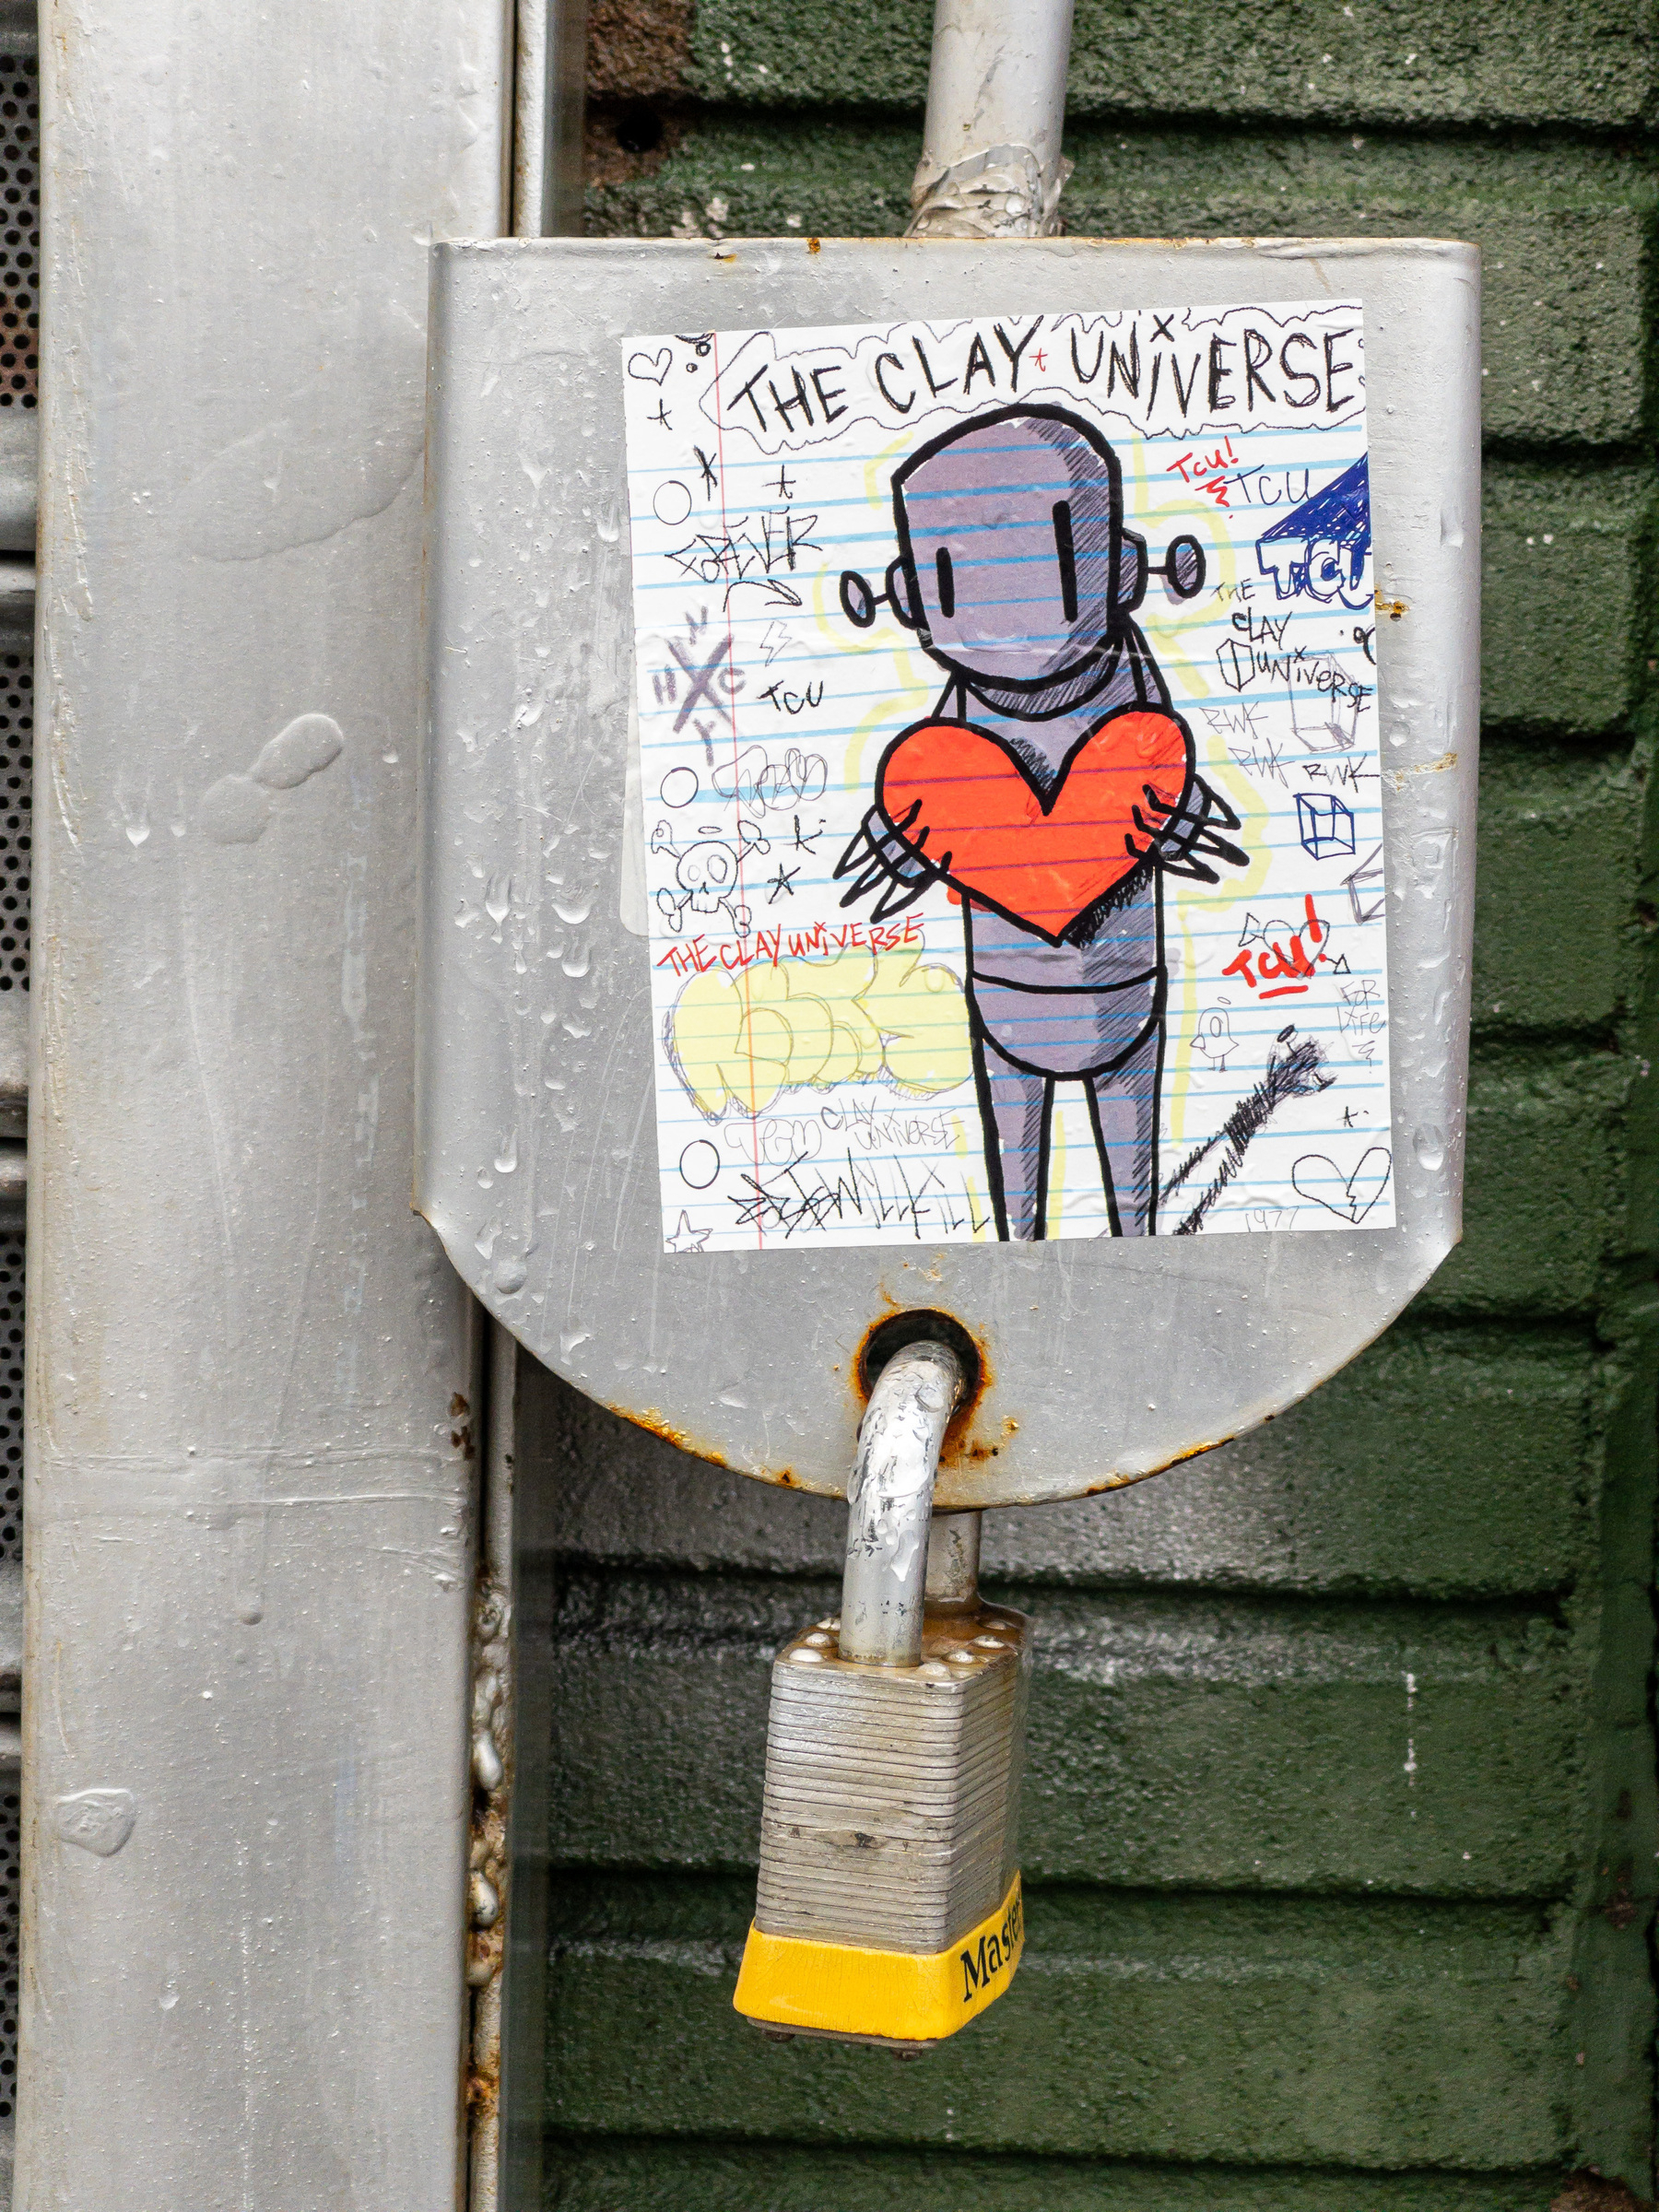 Sticker on a gate lock plate with yellow plastic bottomed lock. The sticker depicts a cartoon robot character holding a heart with “The Clay Universe” written above.